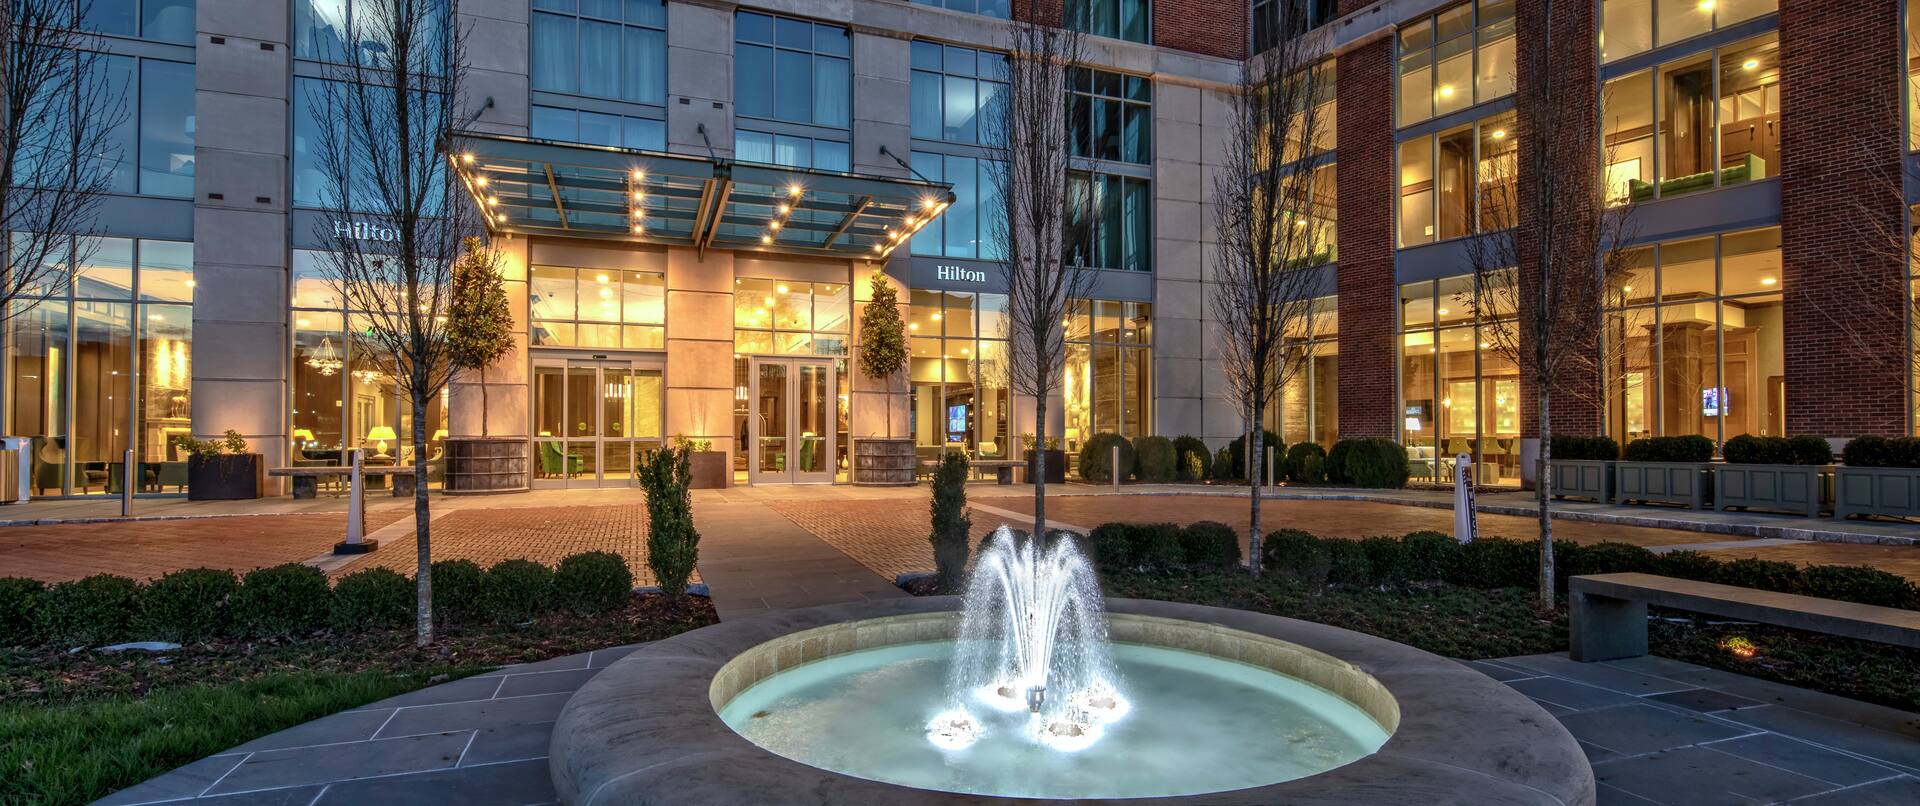 Exterior Fountain at the Hotel's Entrance